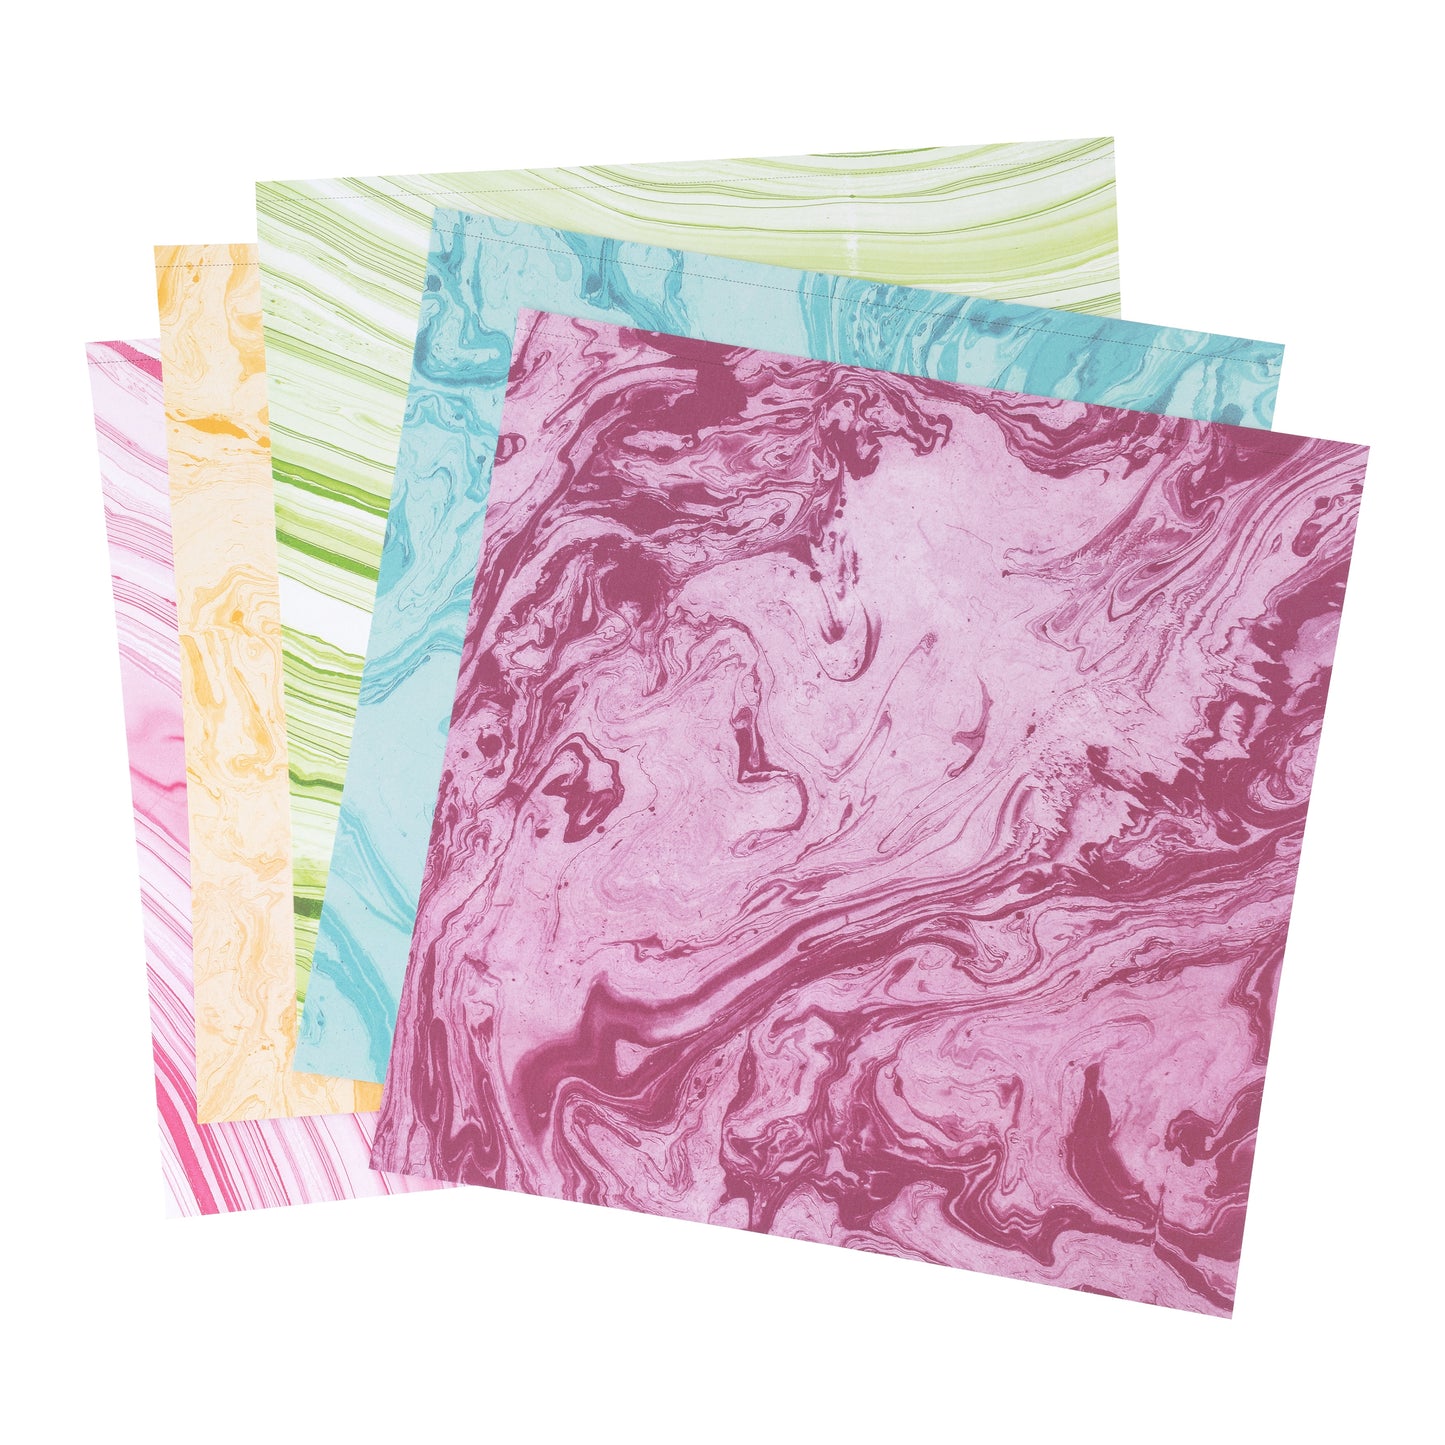 Burano PINK (10) - 12X12 Lightweight Cardstock Paper - 52lb Cover